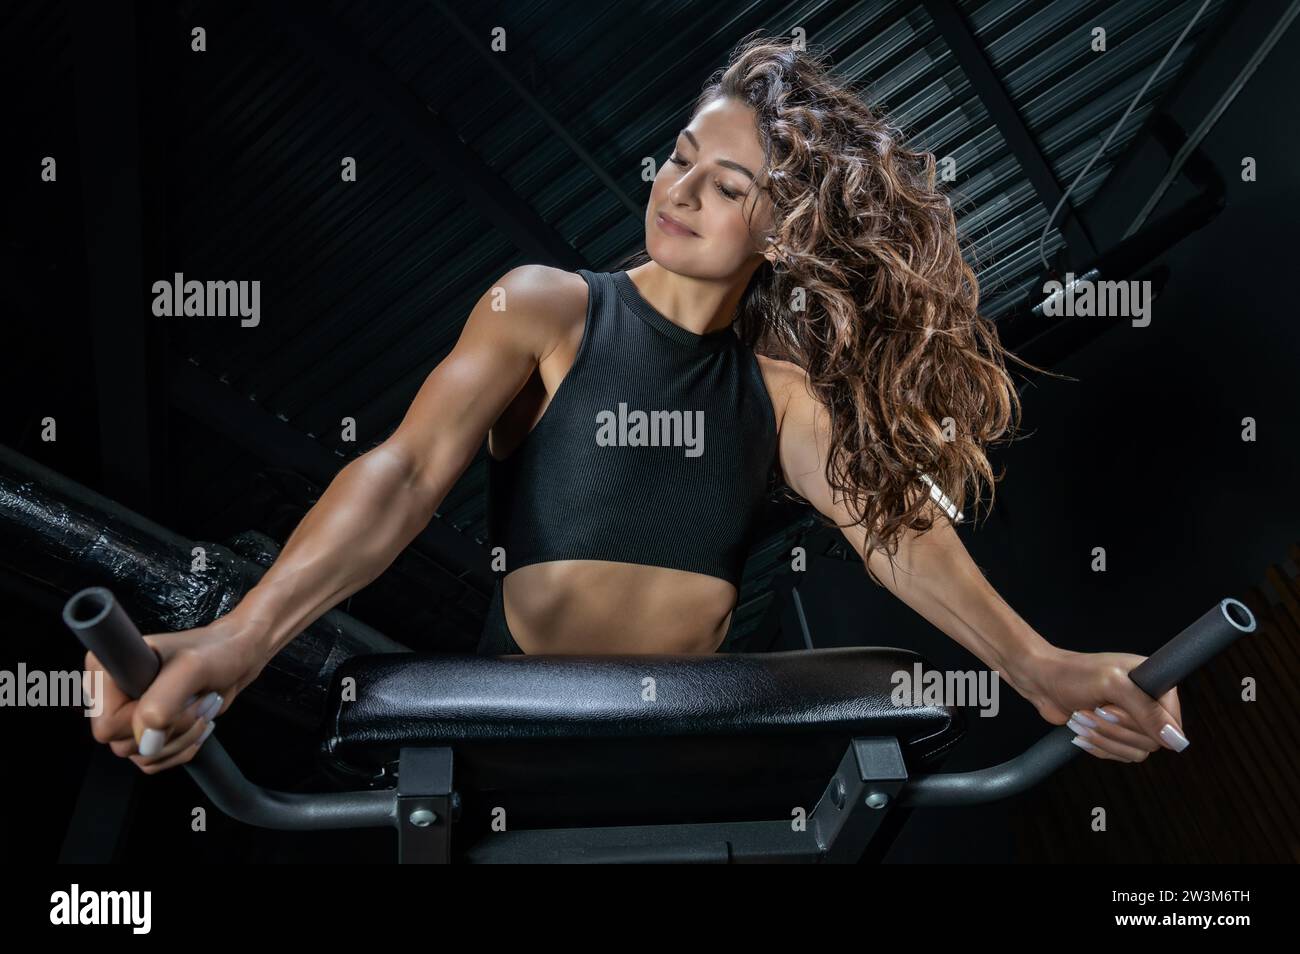 Charming brunette doing hyperextension in the gym. Press pumping. Fitness and bodybuilding concept. Mixed media Stock Photo